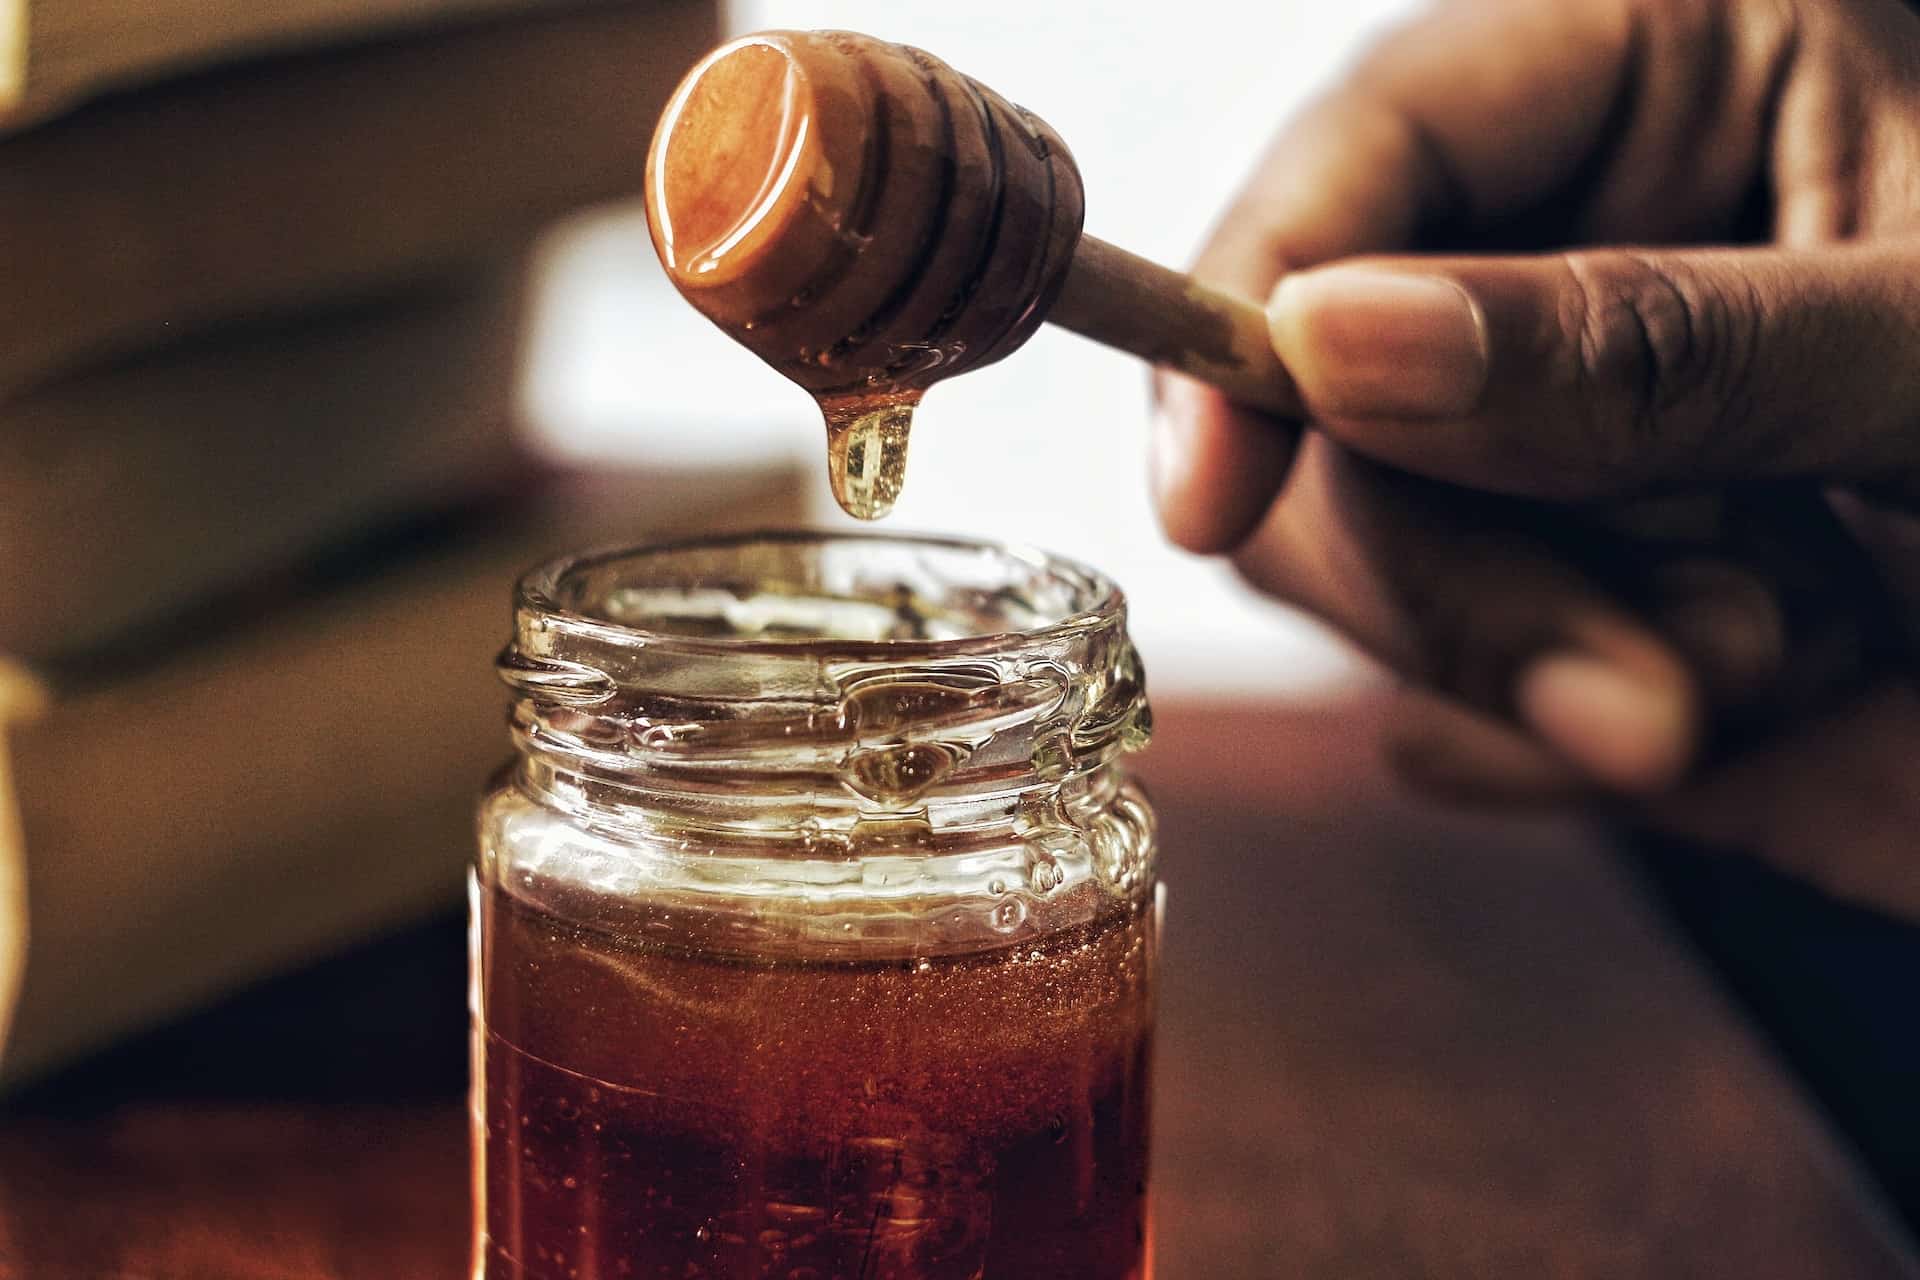 Honey dripping from a honey spoon